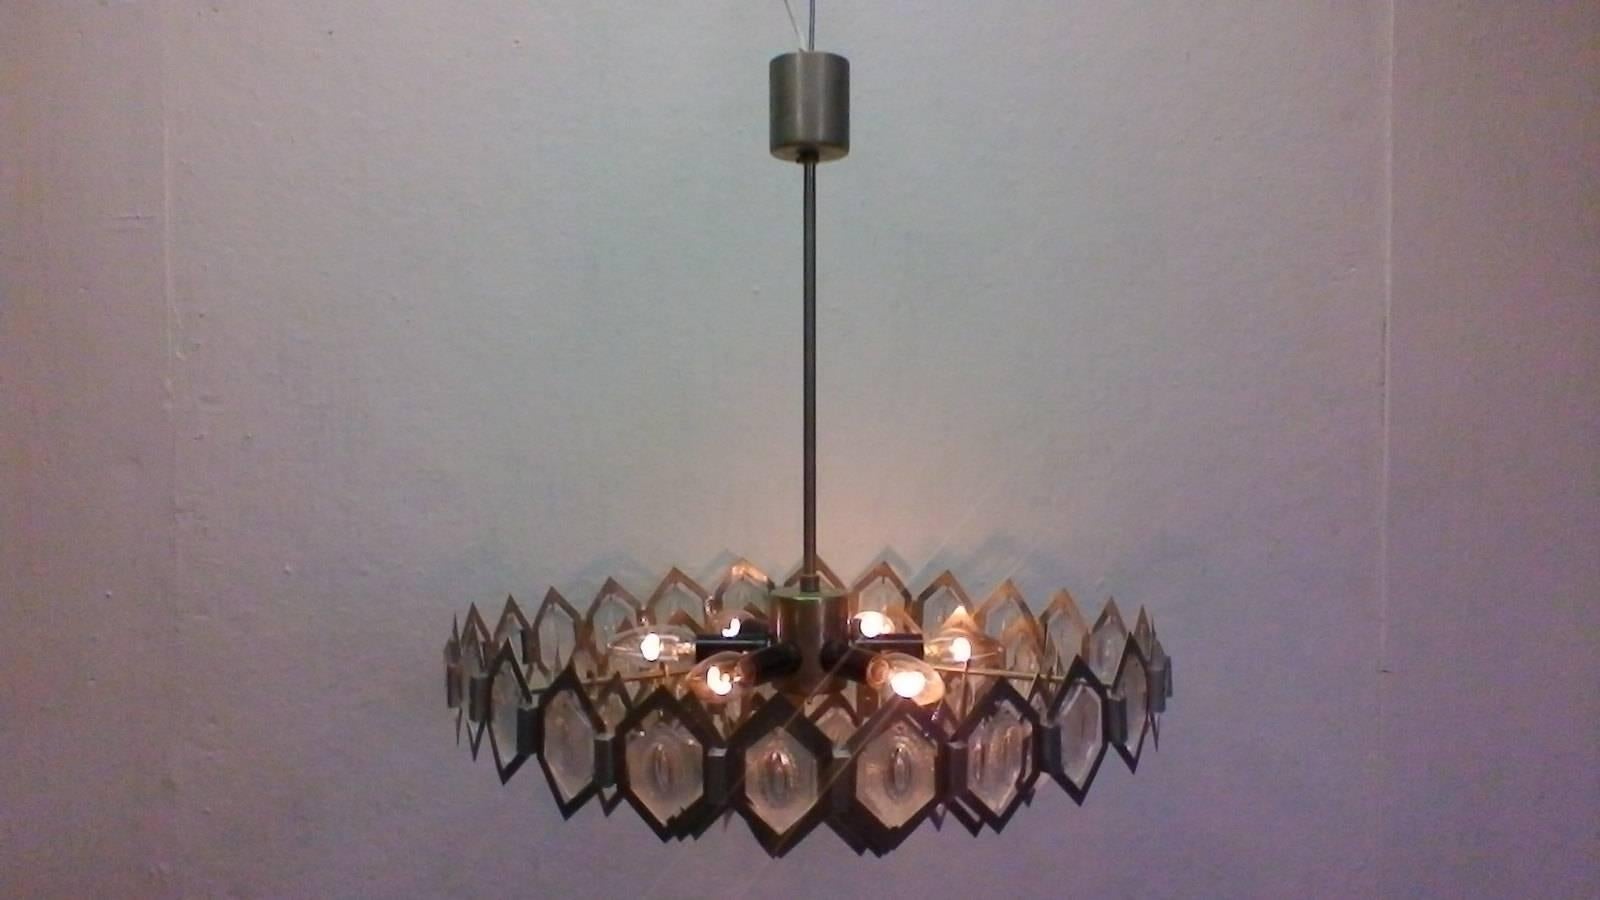 Czech designer Jaroslav Bejvl. The item is made of a combination of glass and metal and has six bulbs. The original preserved and functional condition. Very beautiful light style.